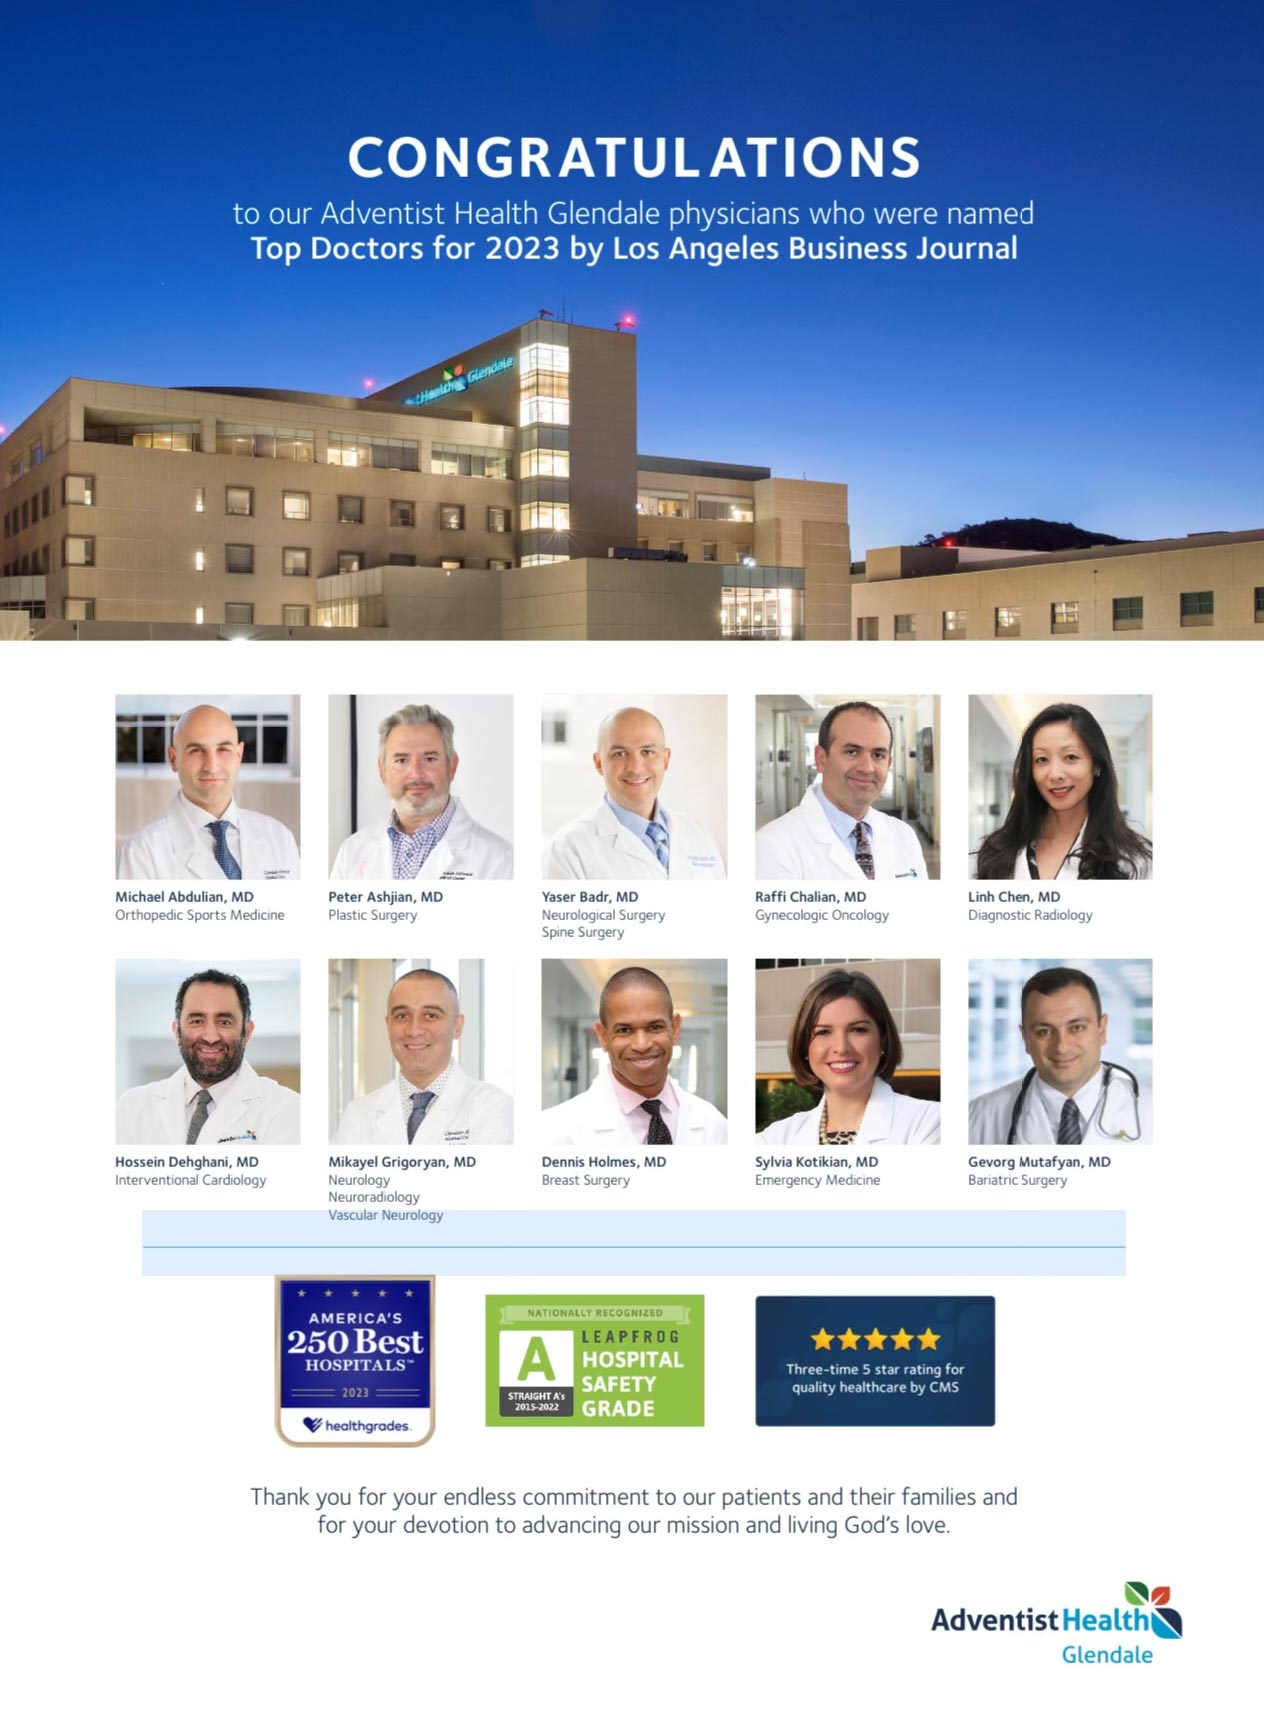 Top Doctors For 2023 By LA Business Journal